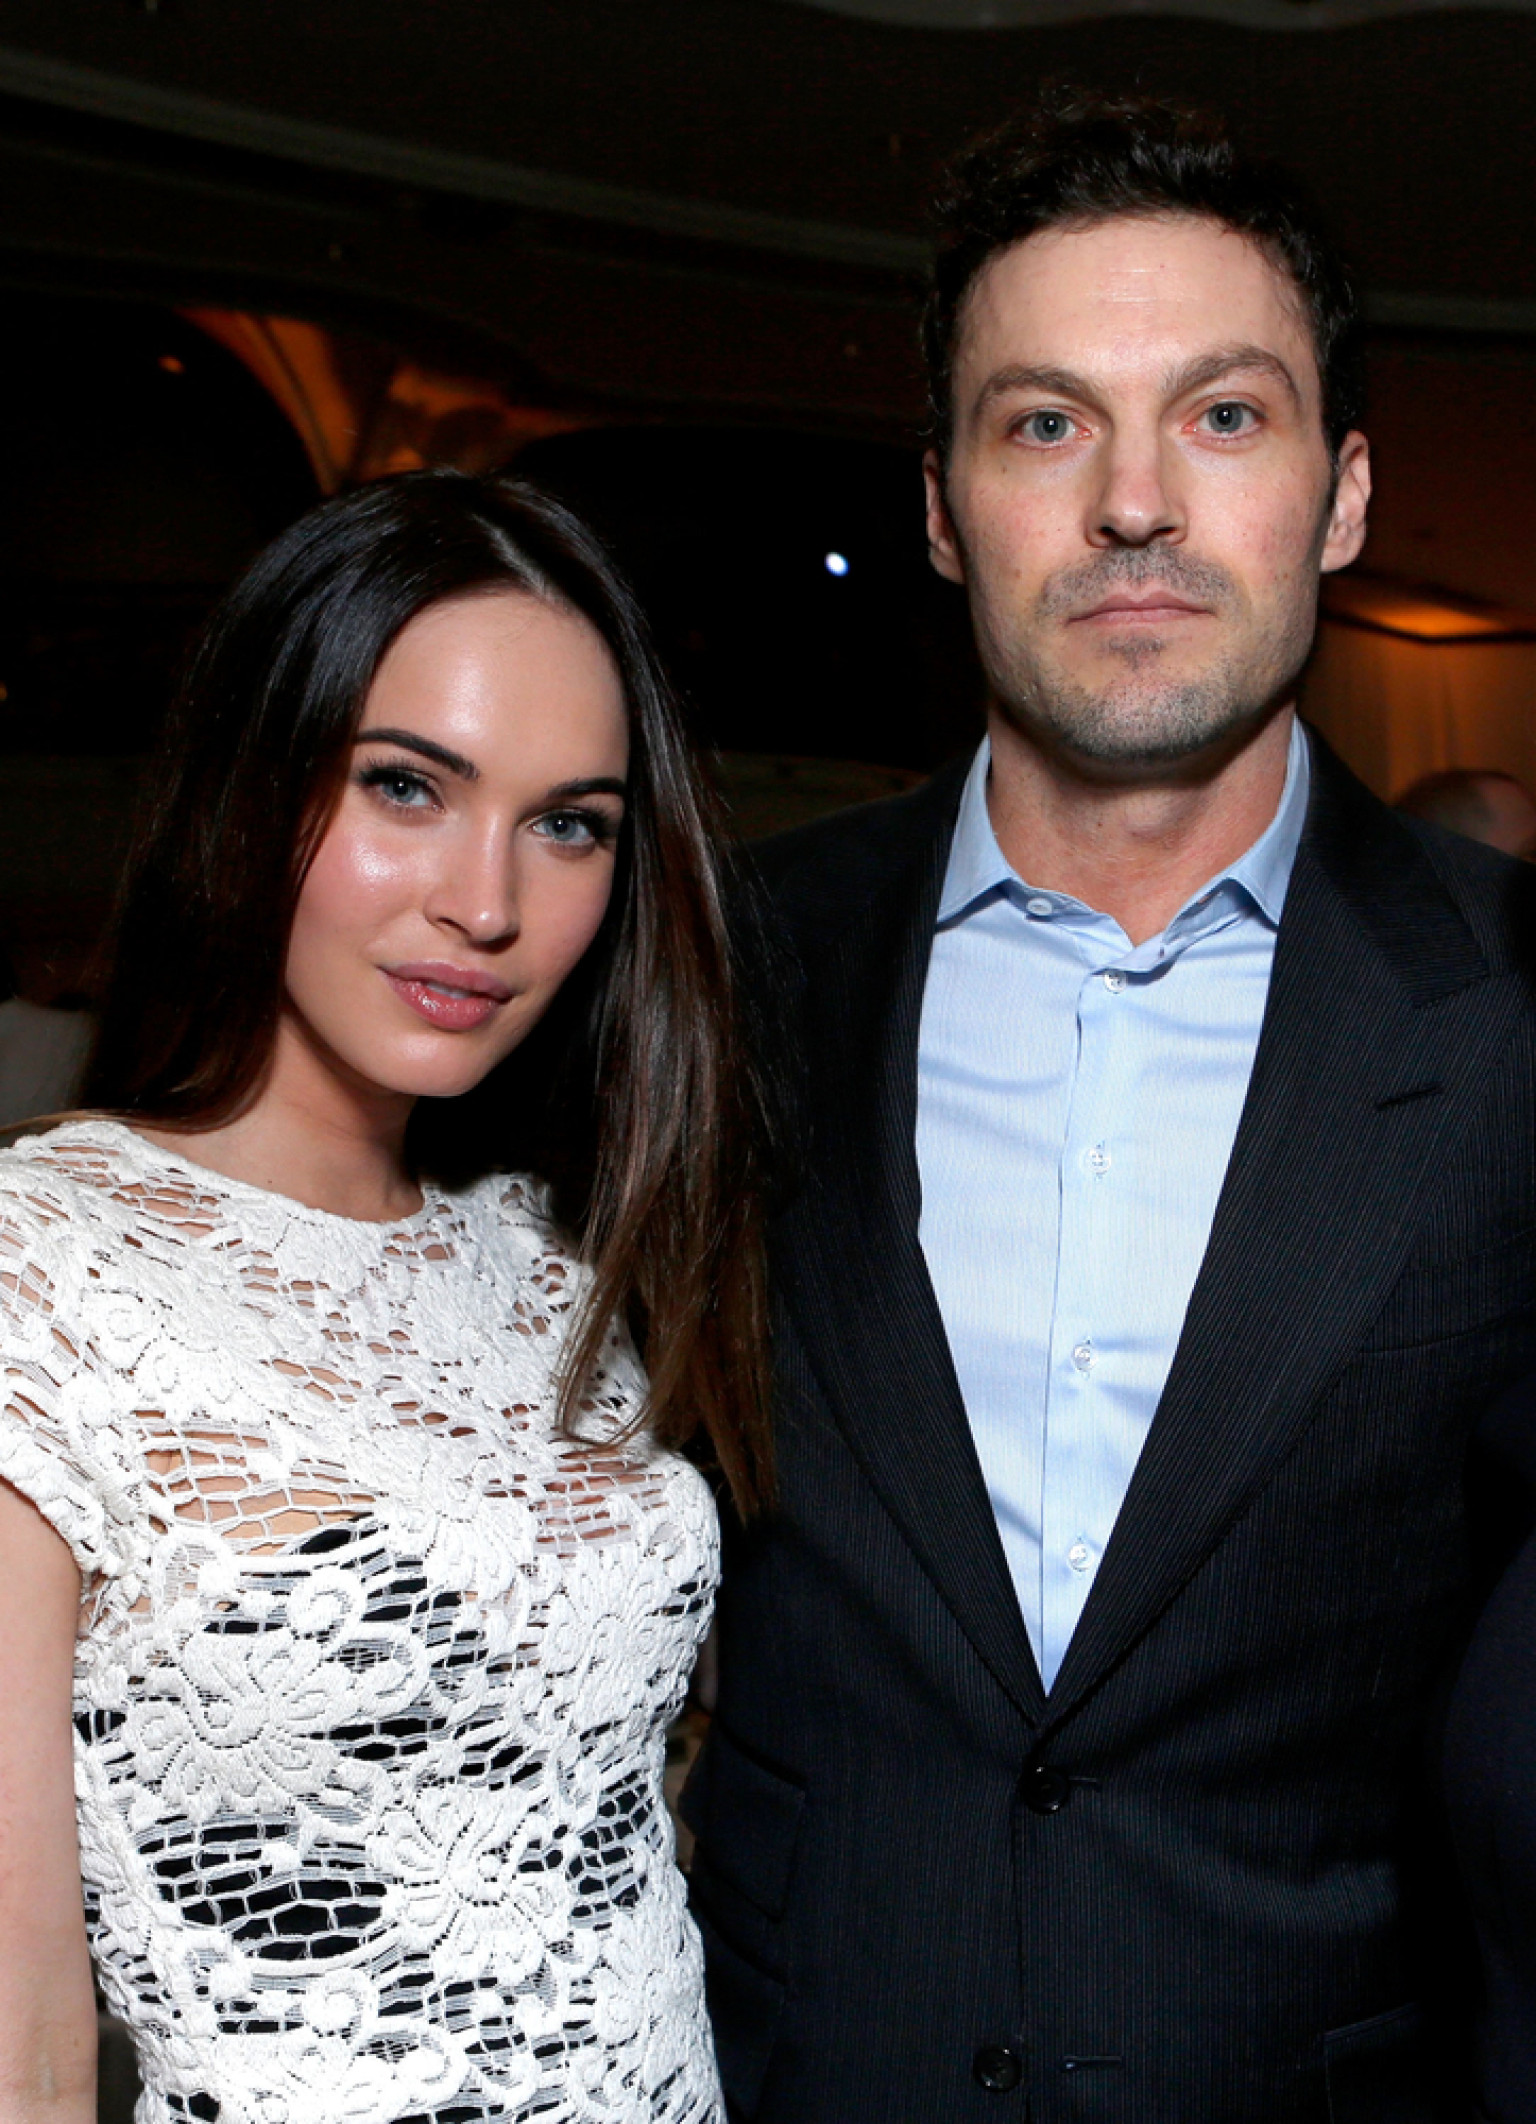 BEVERLY HILLS, CA - DECEMBER 07: (L-R) Actors Megan Fox and Brian Austin Green attend the 7th Annual March of Dimes Celebration of Babies, a Hollywood Luncheon, at the Beverly Hills Hotel on December 7, 2012 in Beverly Hills, California. (Photo by Alexandra Wyman/Getty Images For March Of Dimes)